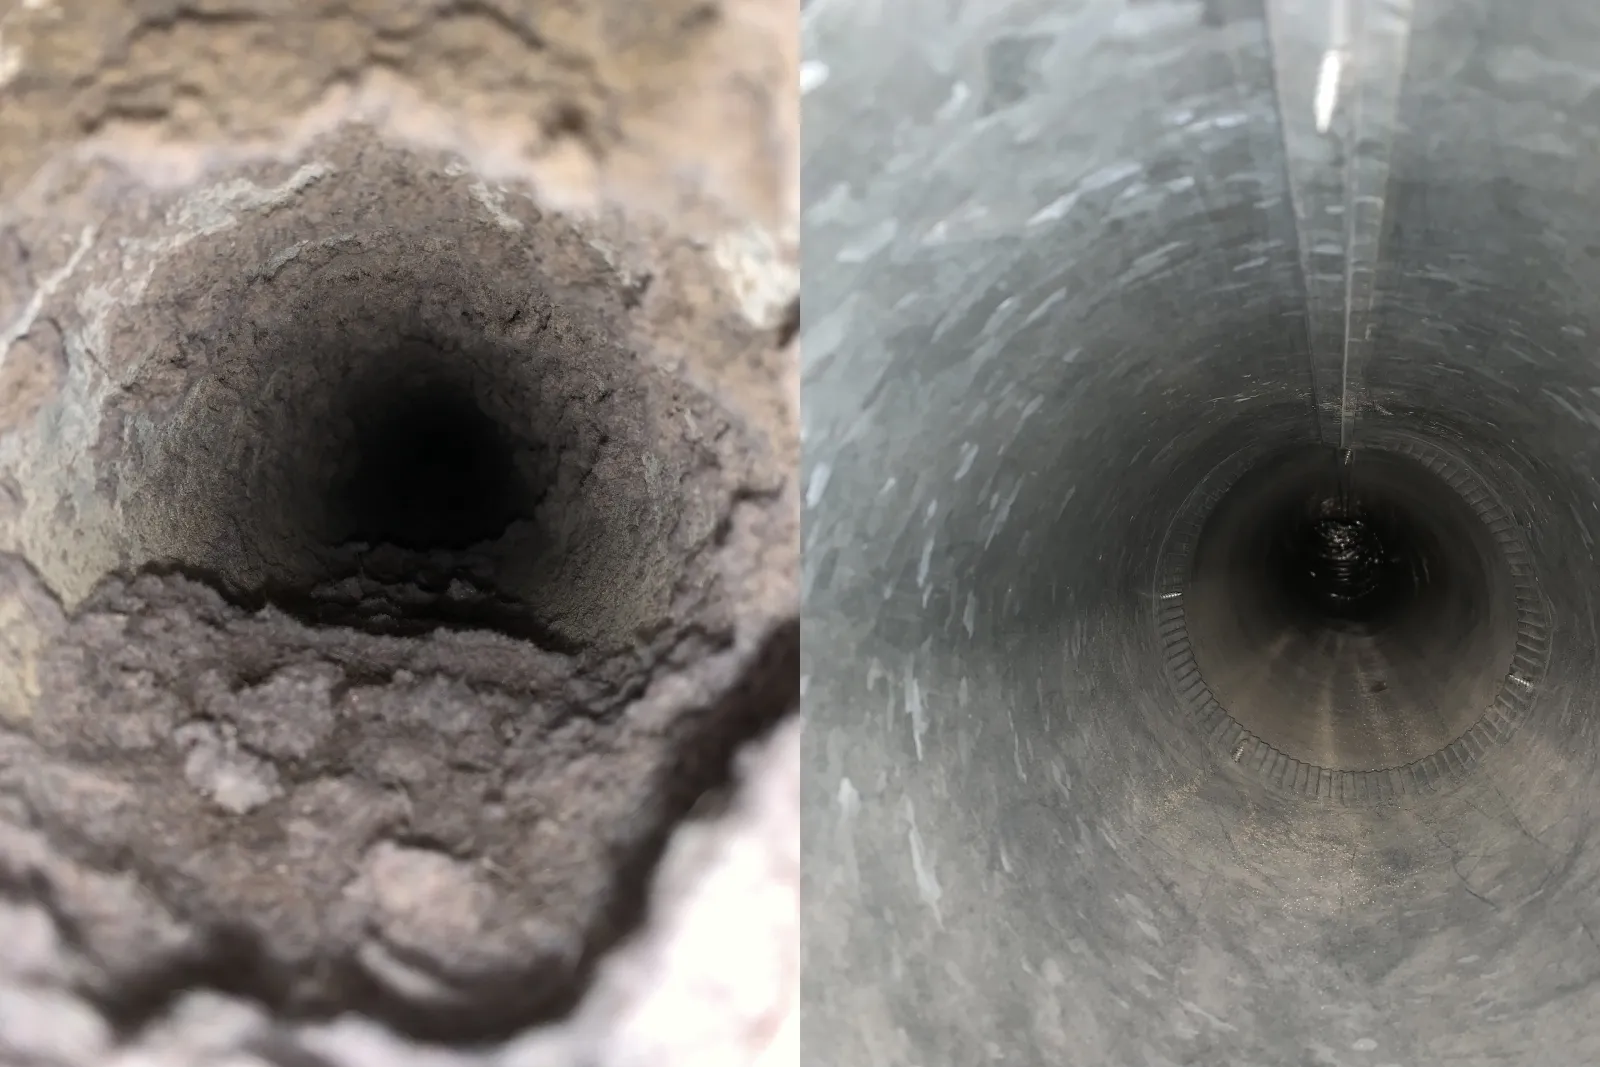 before and after of inside a dirty and clean air duct vent which previously smelled